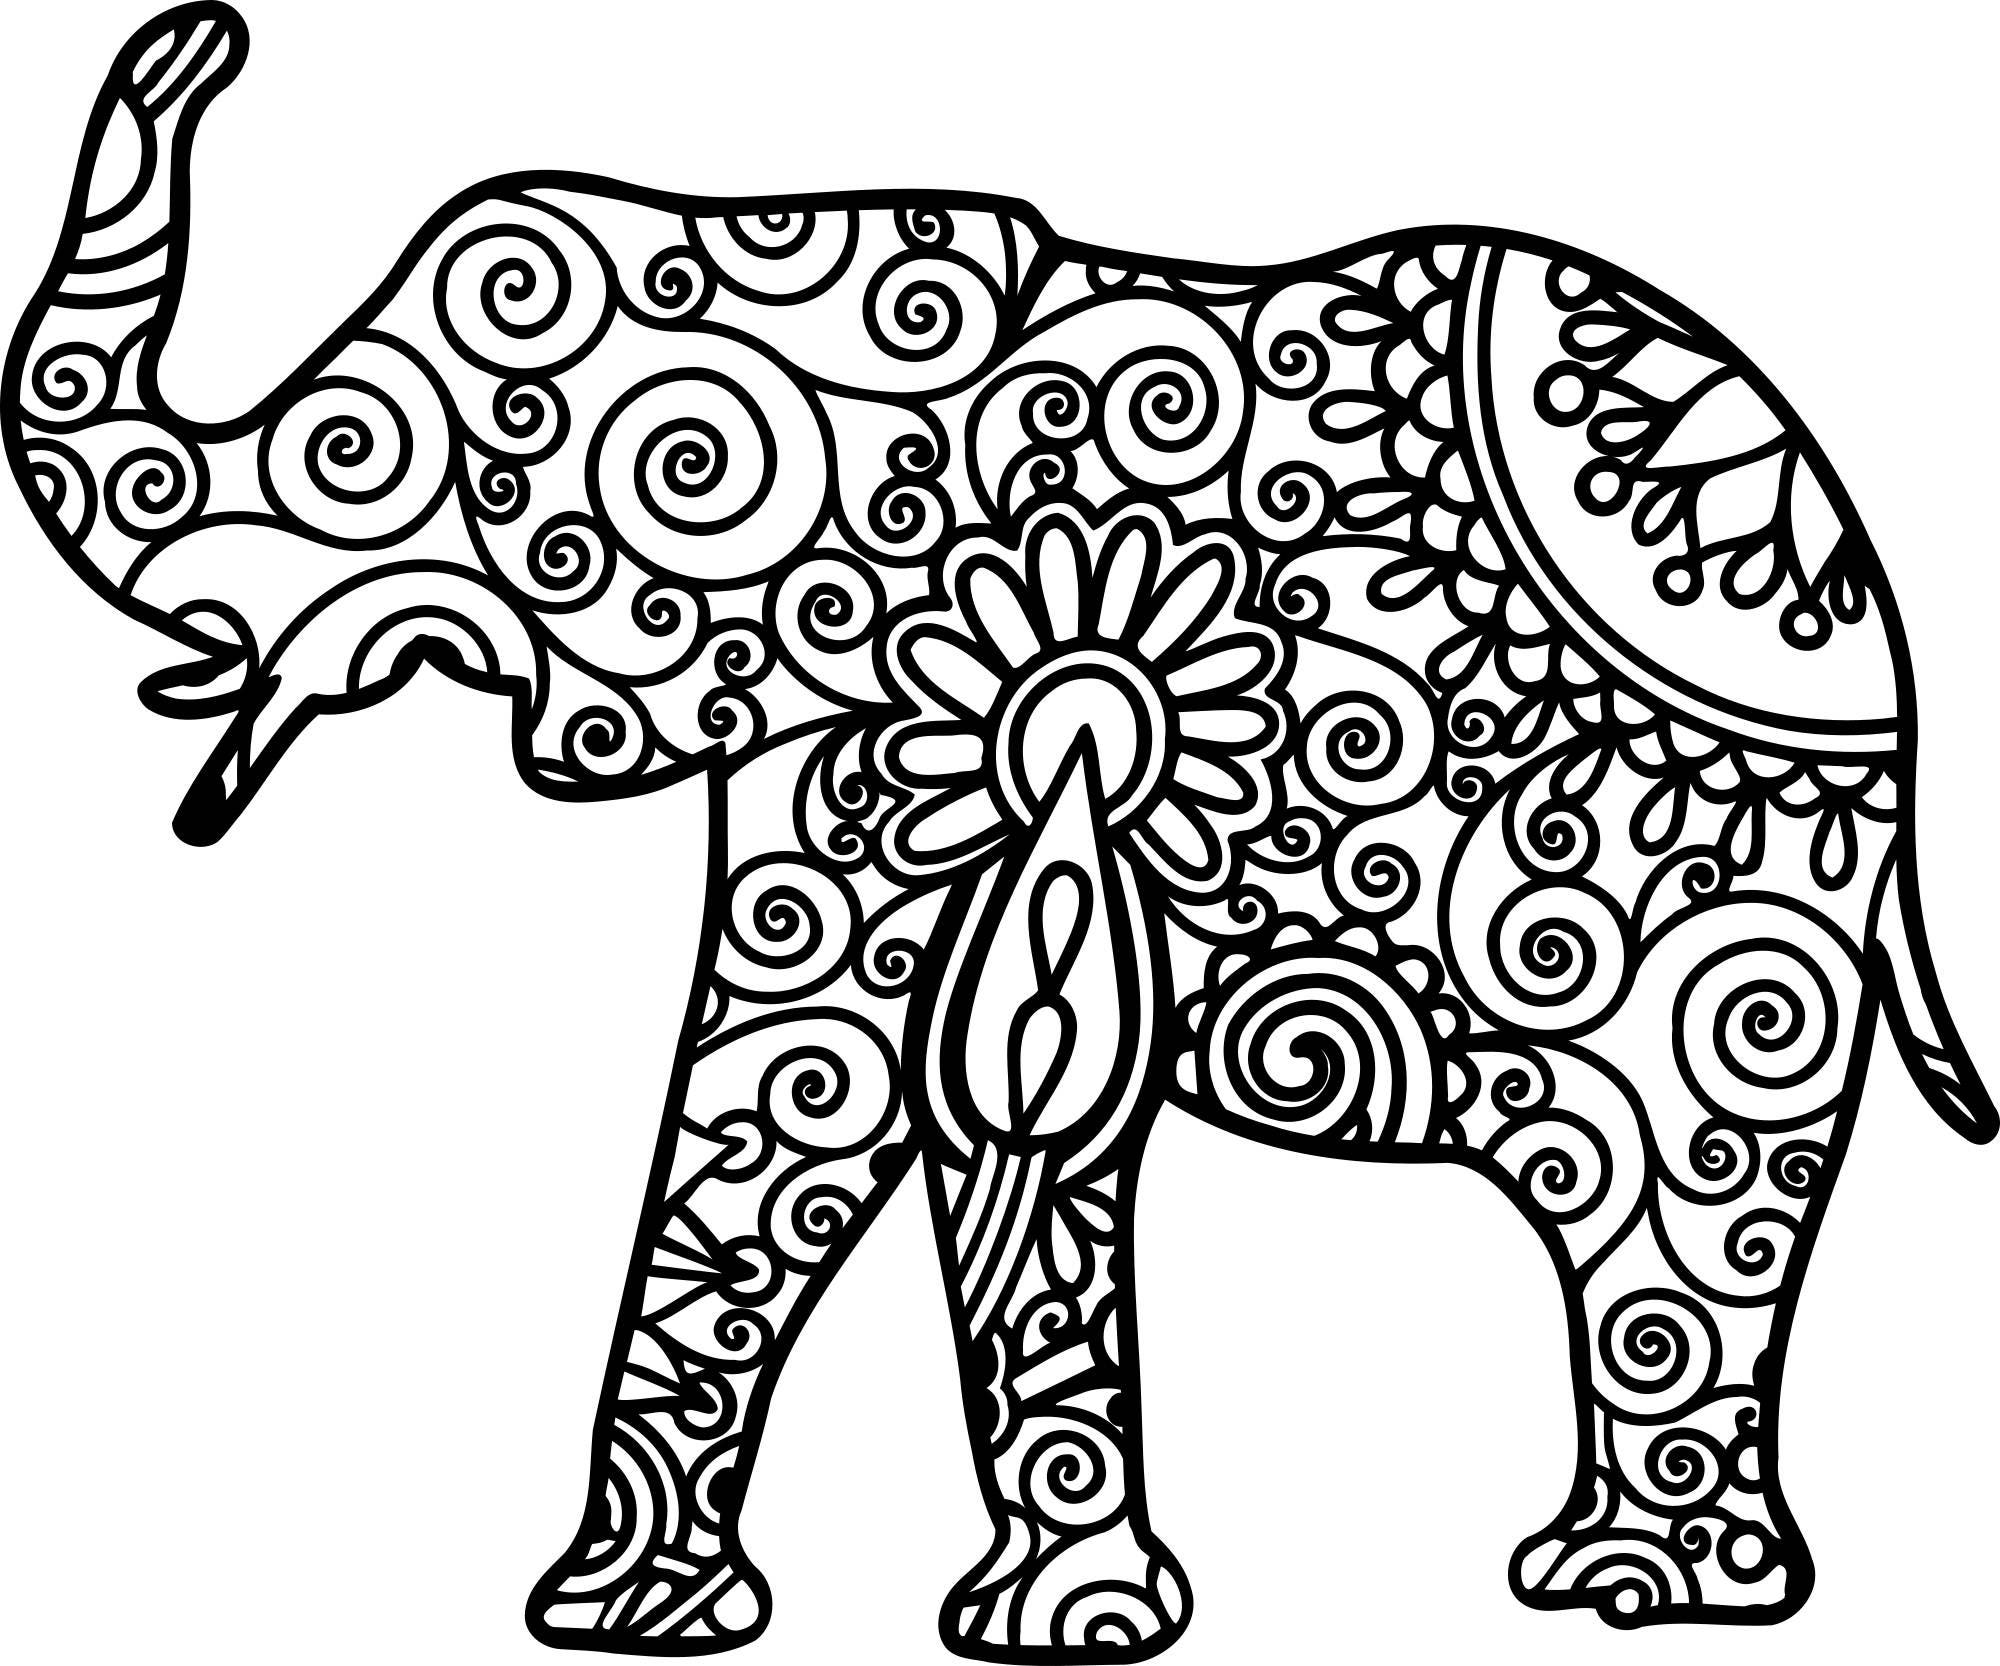 Download Mandala Elephant SVG cuttable file from LeighsSVGs on Etsy ...